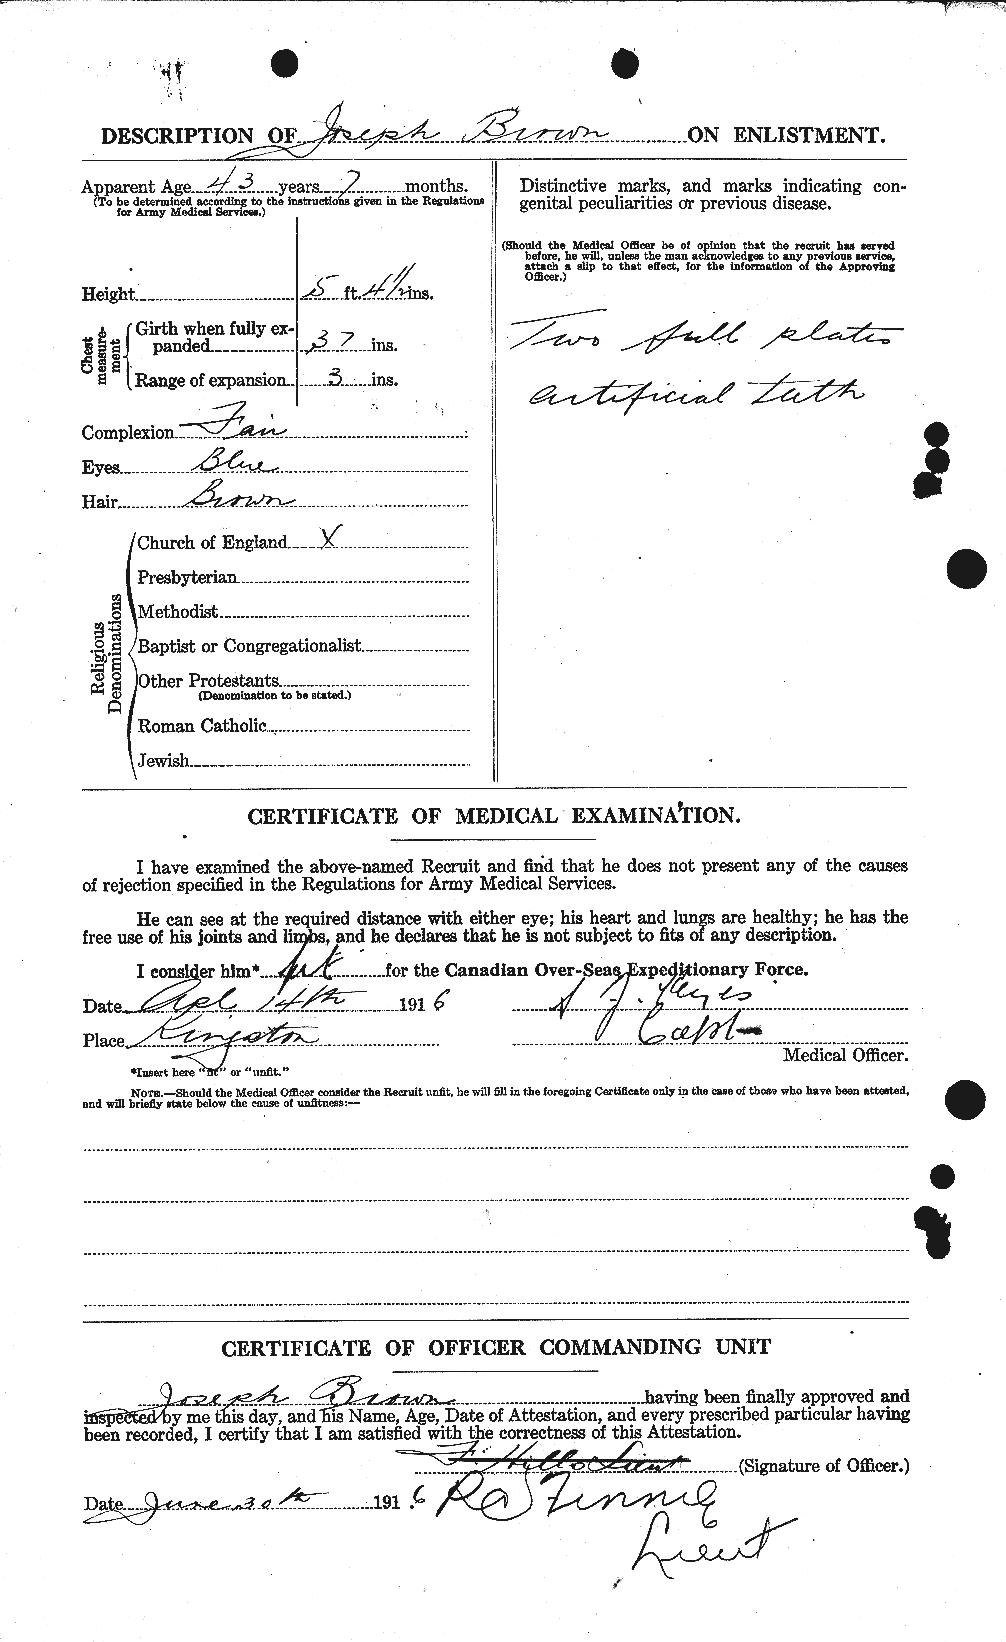 Personnel Records of the First World War - CEF 265929b